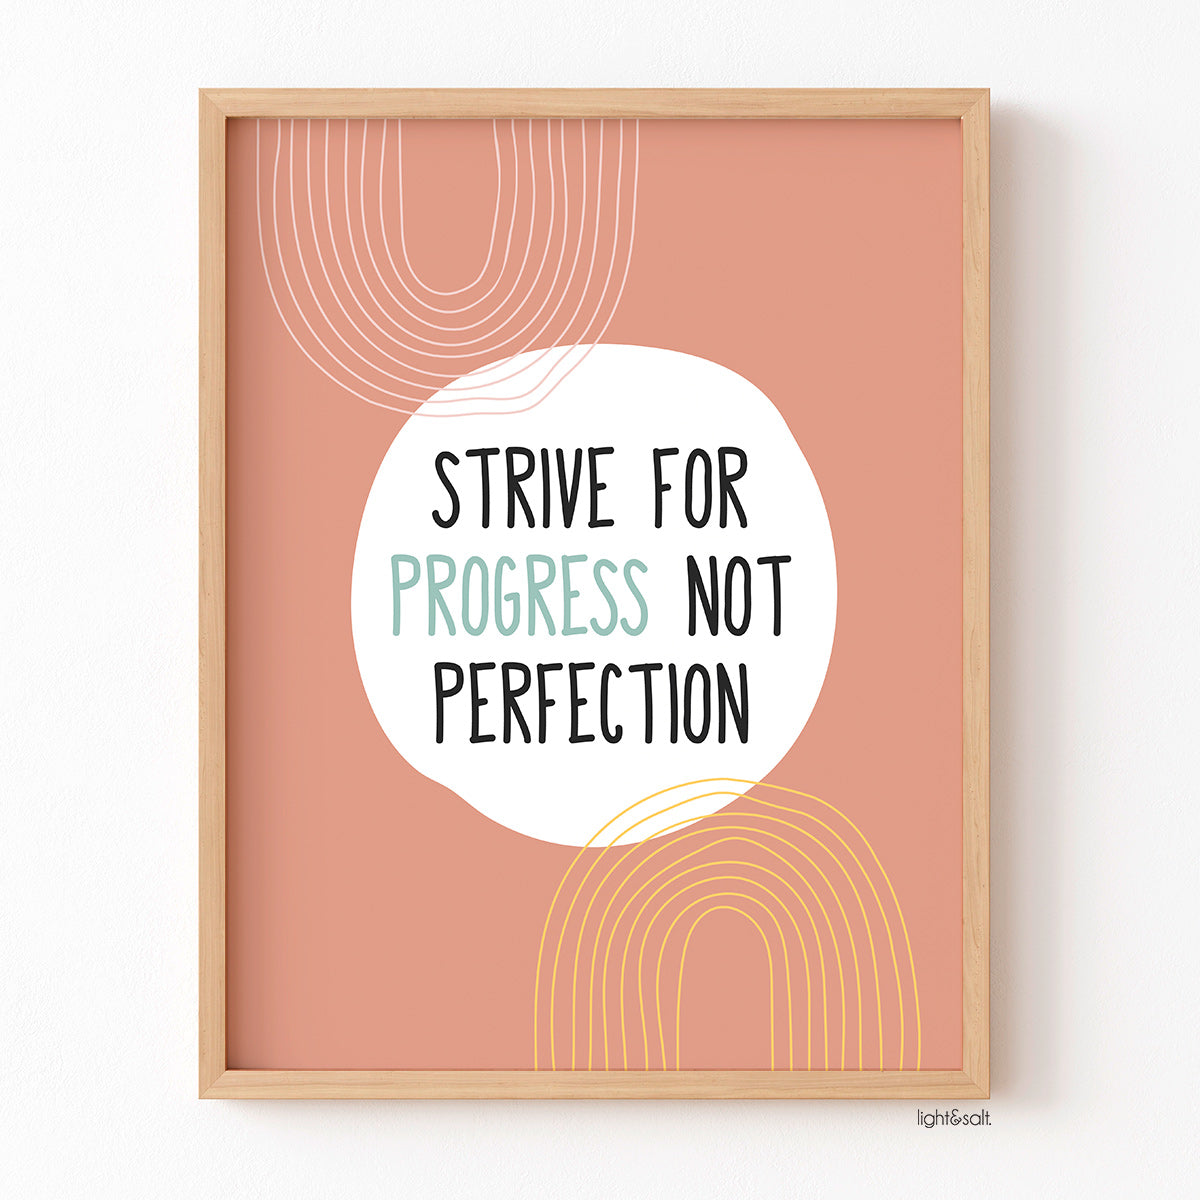 Strive for progress not perfection poster